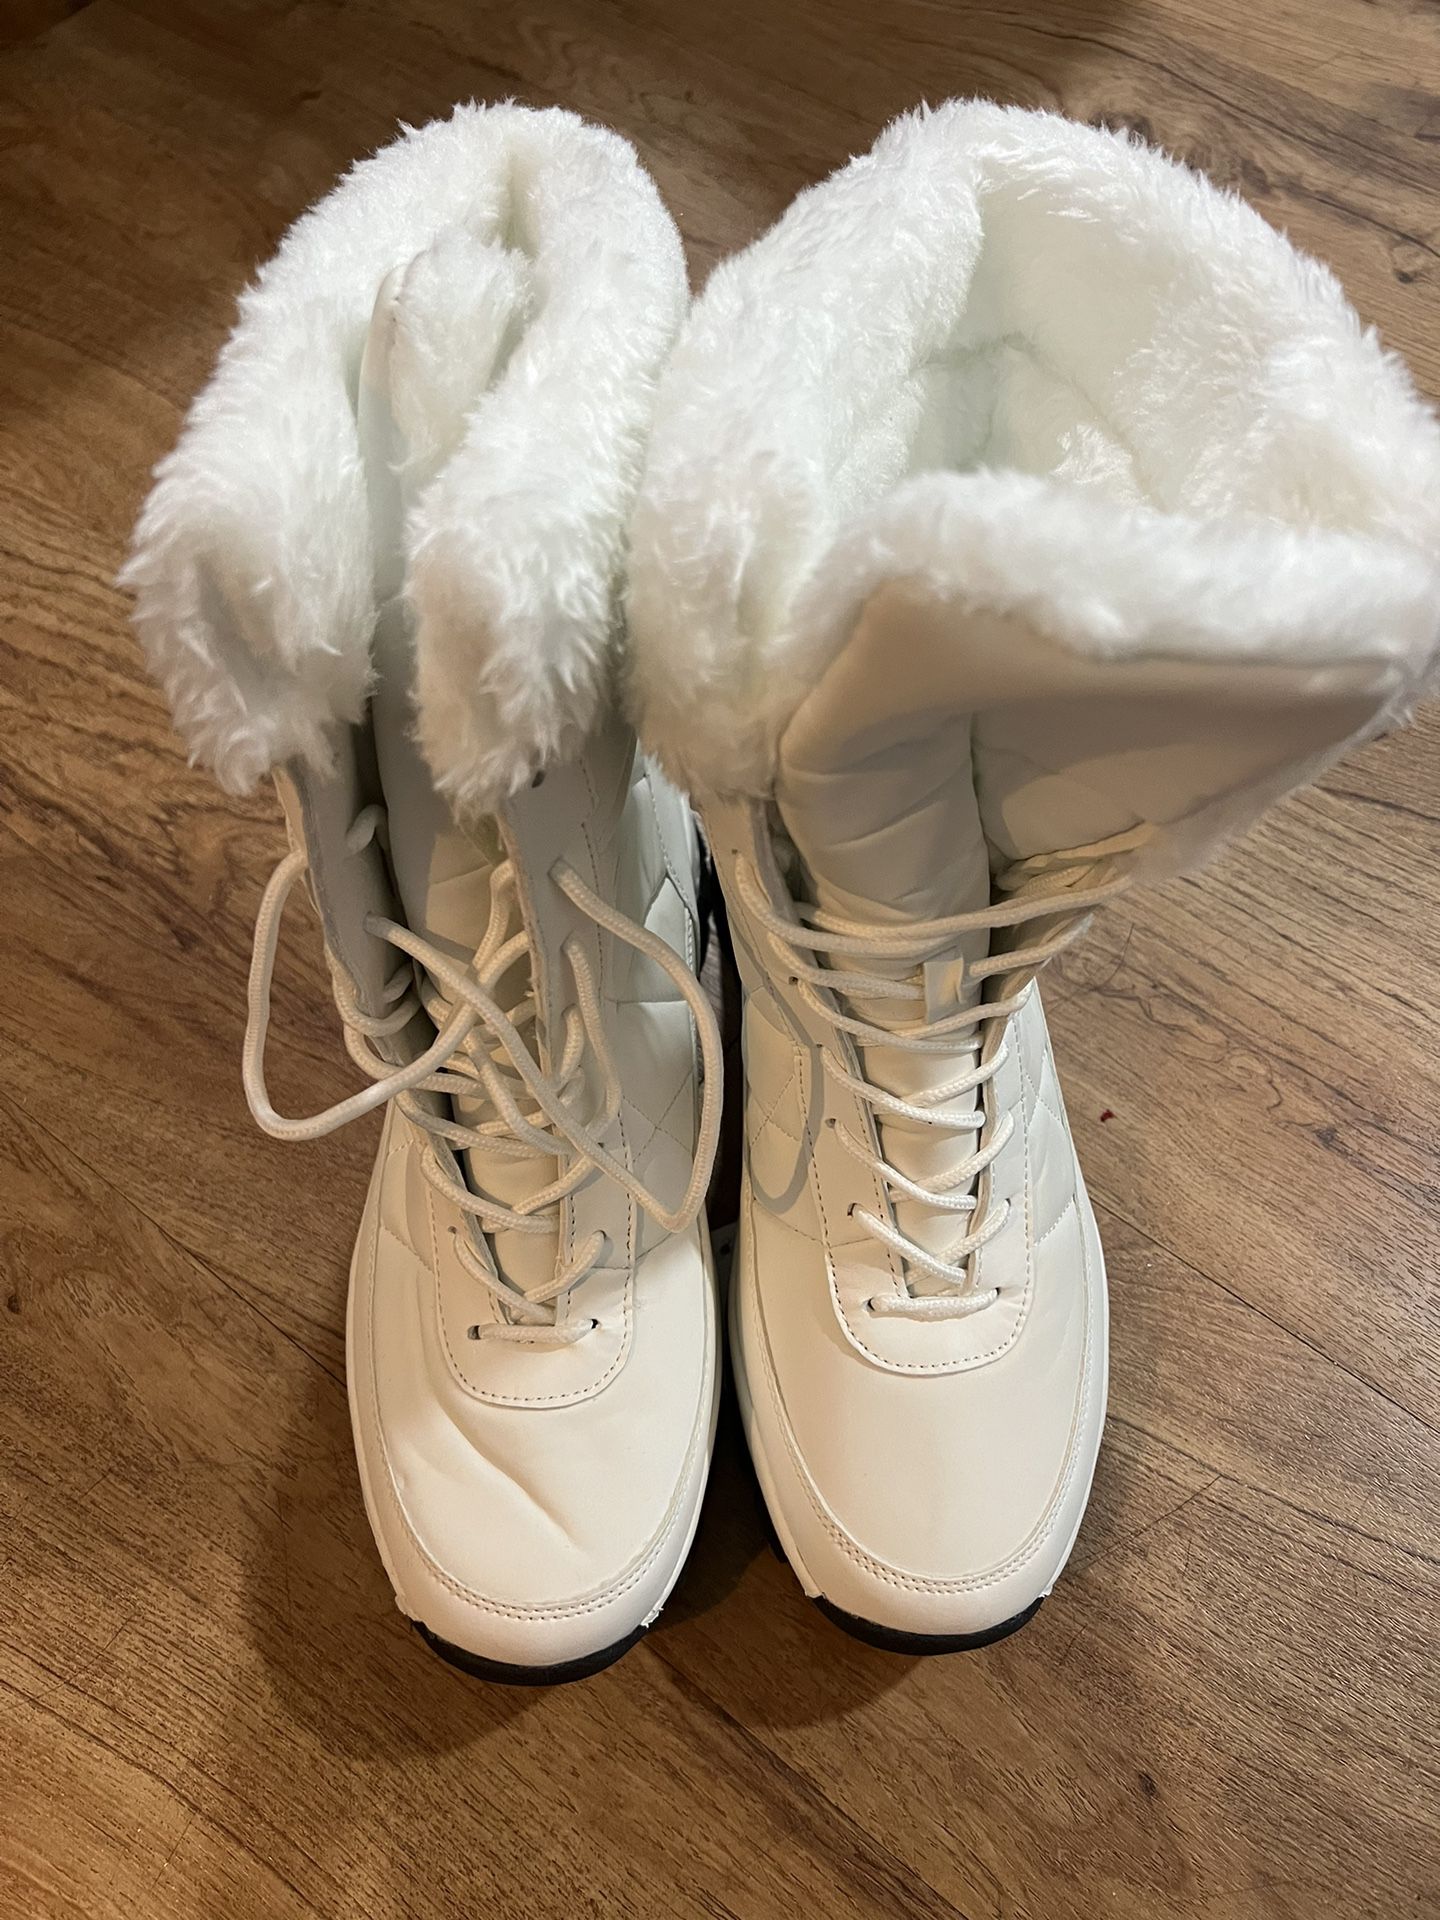 Female Snow Boots 